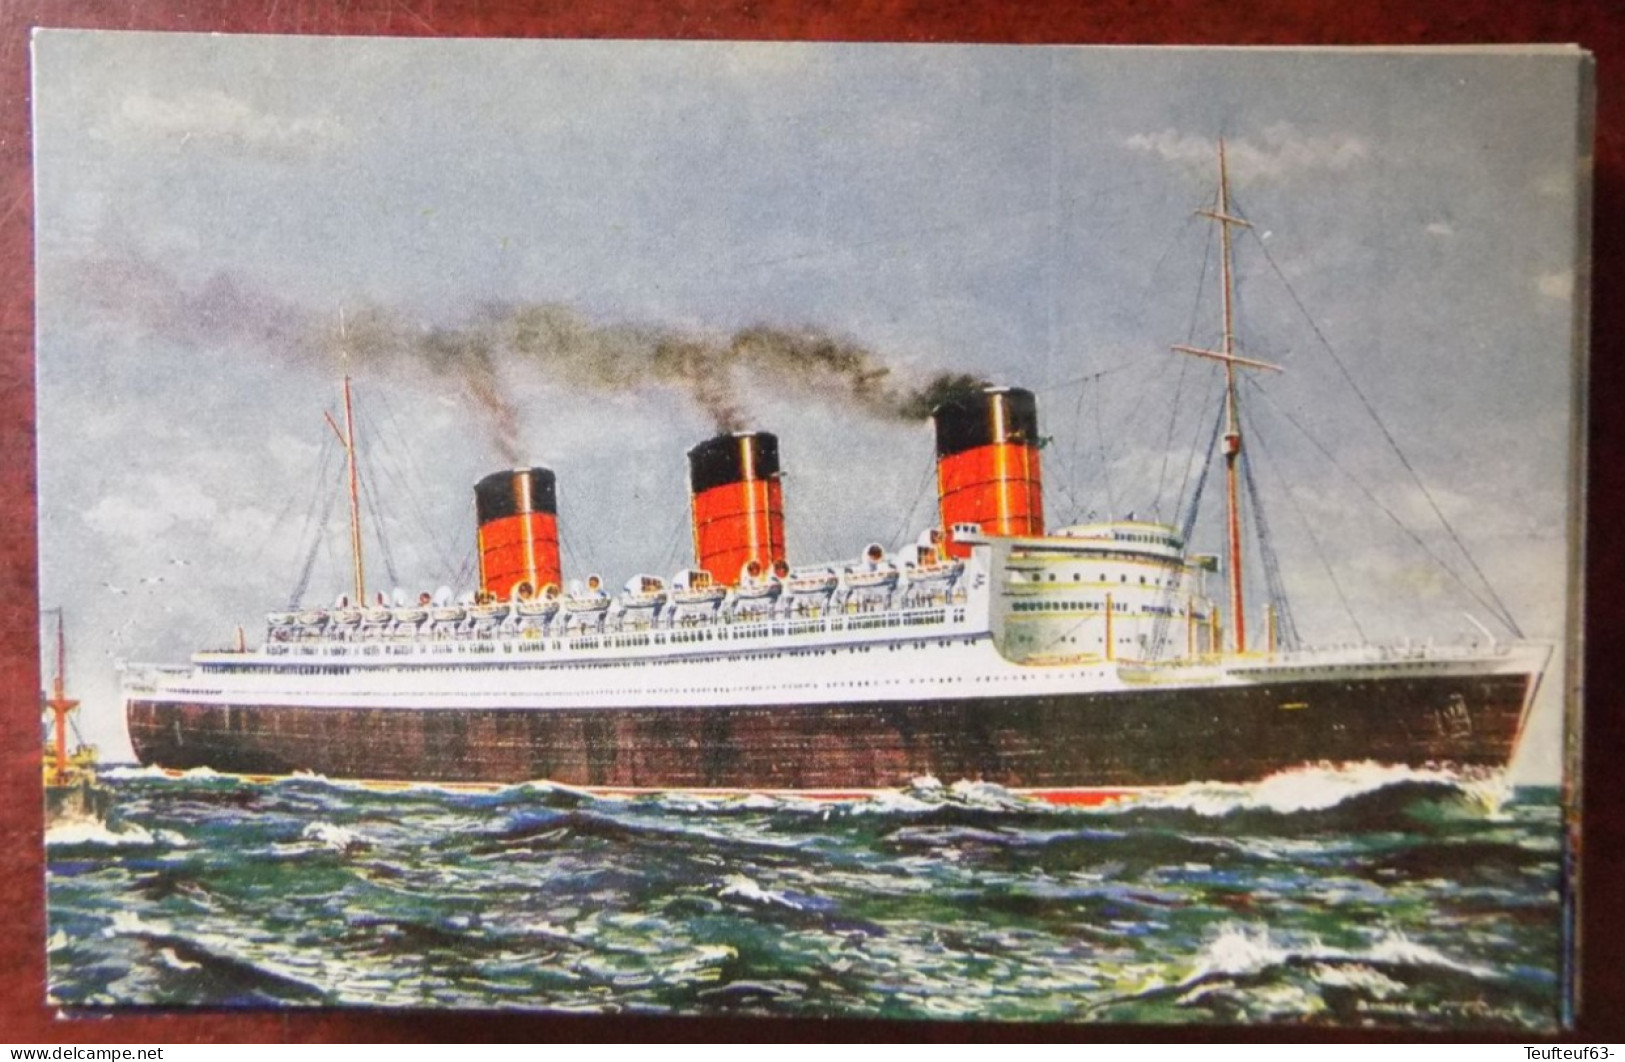 Cpa Paquebot R.M.S. Queen Mary - Ill. Church - Dampfer